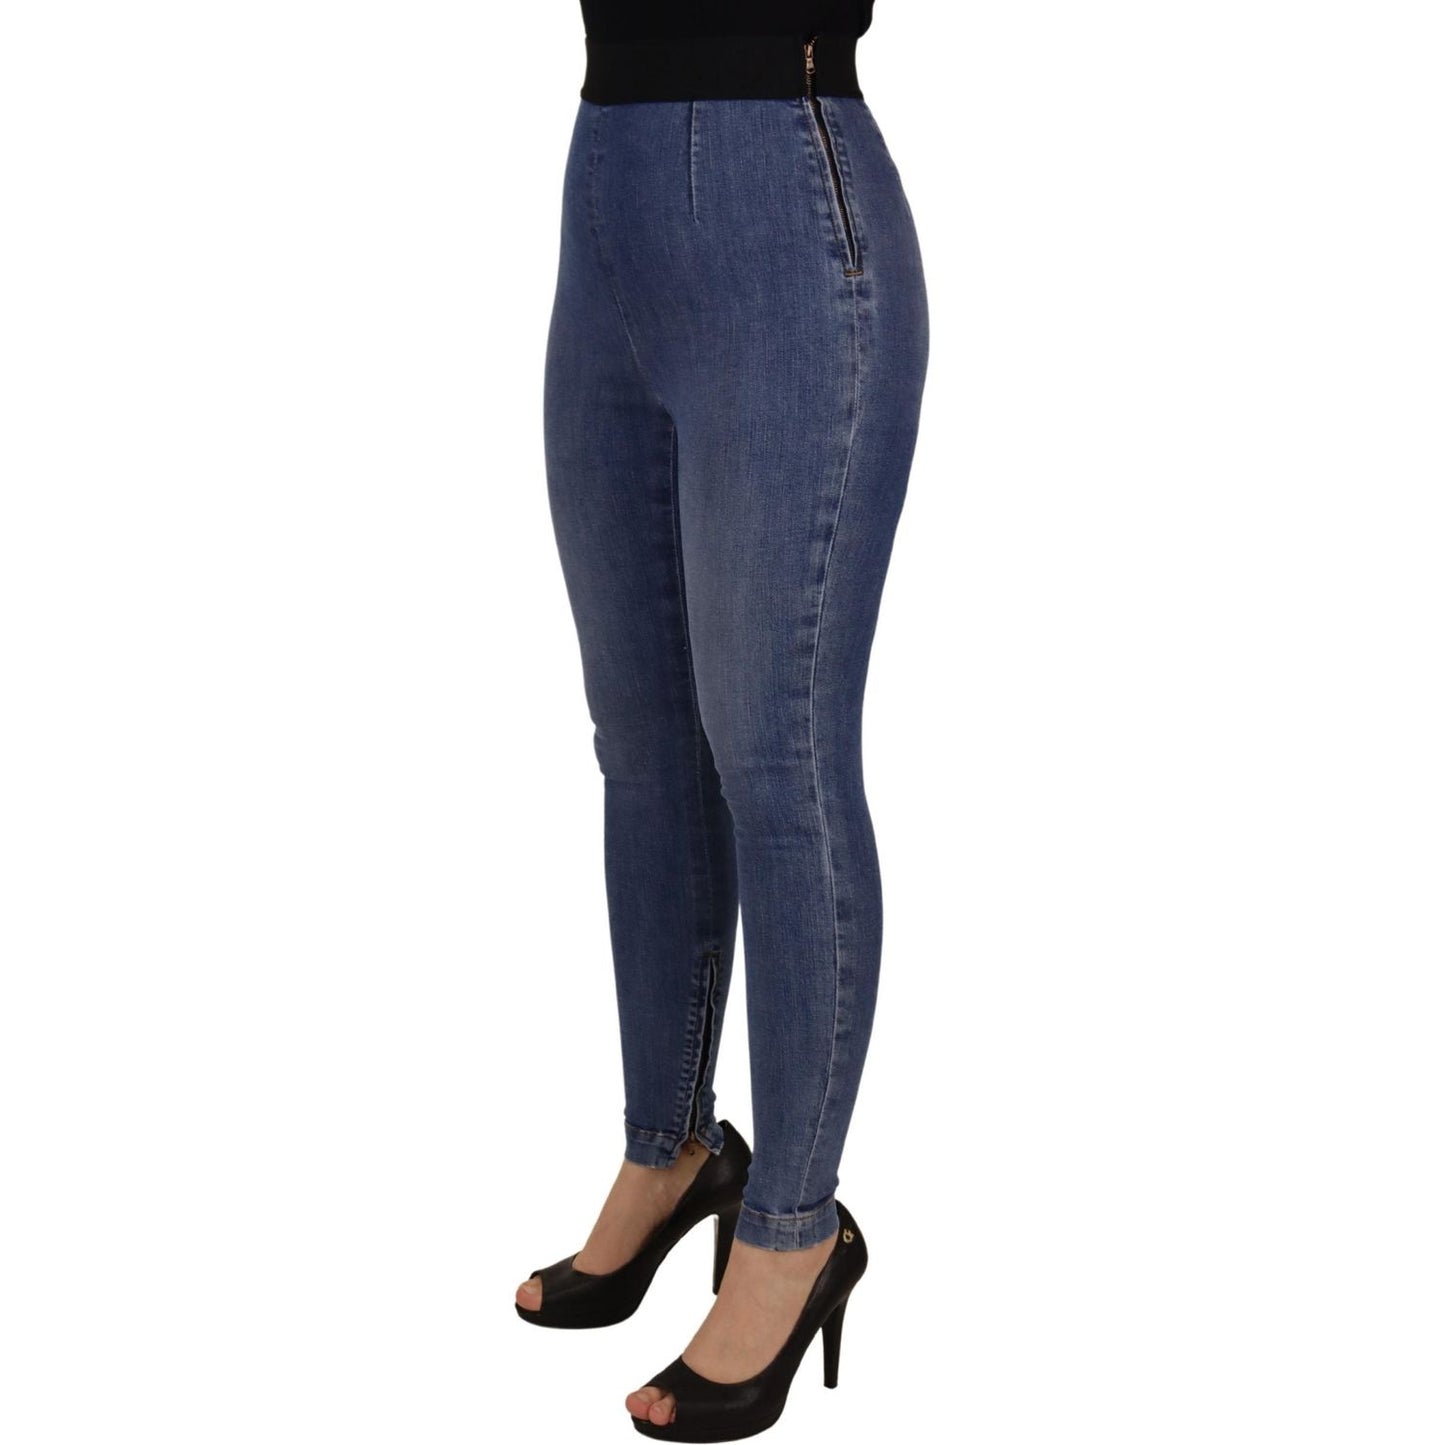 Dolce & Gabbana High Waist Skinny Denim The latest in style, these skinny jeans take it up a notch with a flattering high waist. Made of 98% cotton and 2% elastane, they offer a snug yet comfortable stretch fit. Country of origin: IT, you'll be donning a piece of fashion blue-high-waist-stretchable-skinny-pants-jeans